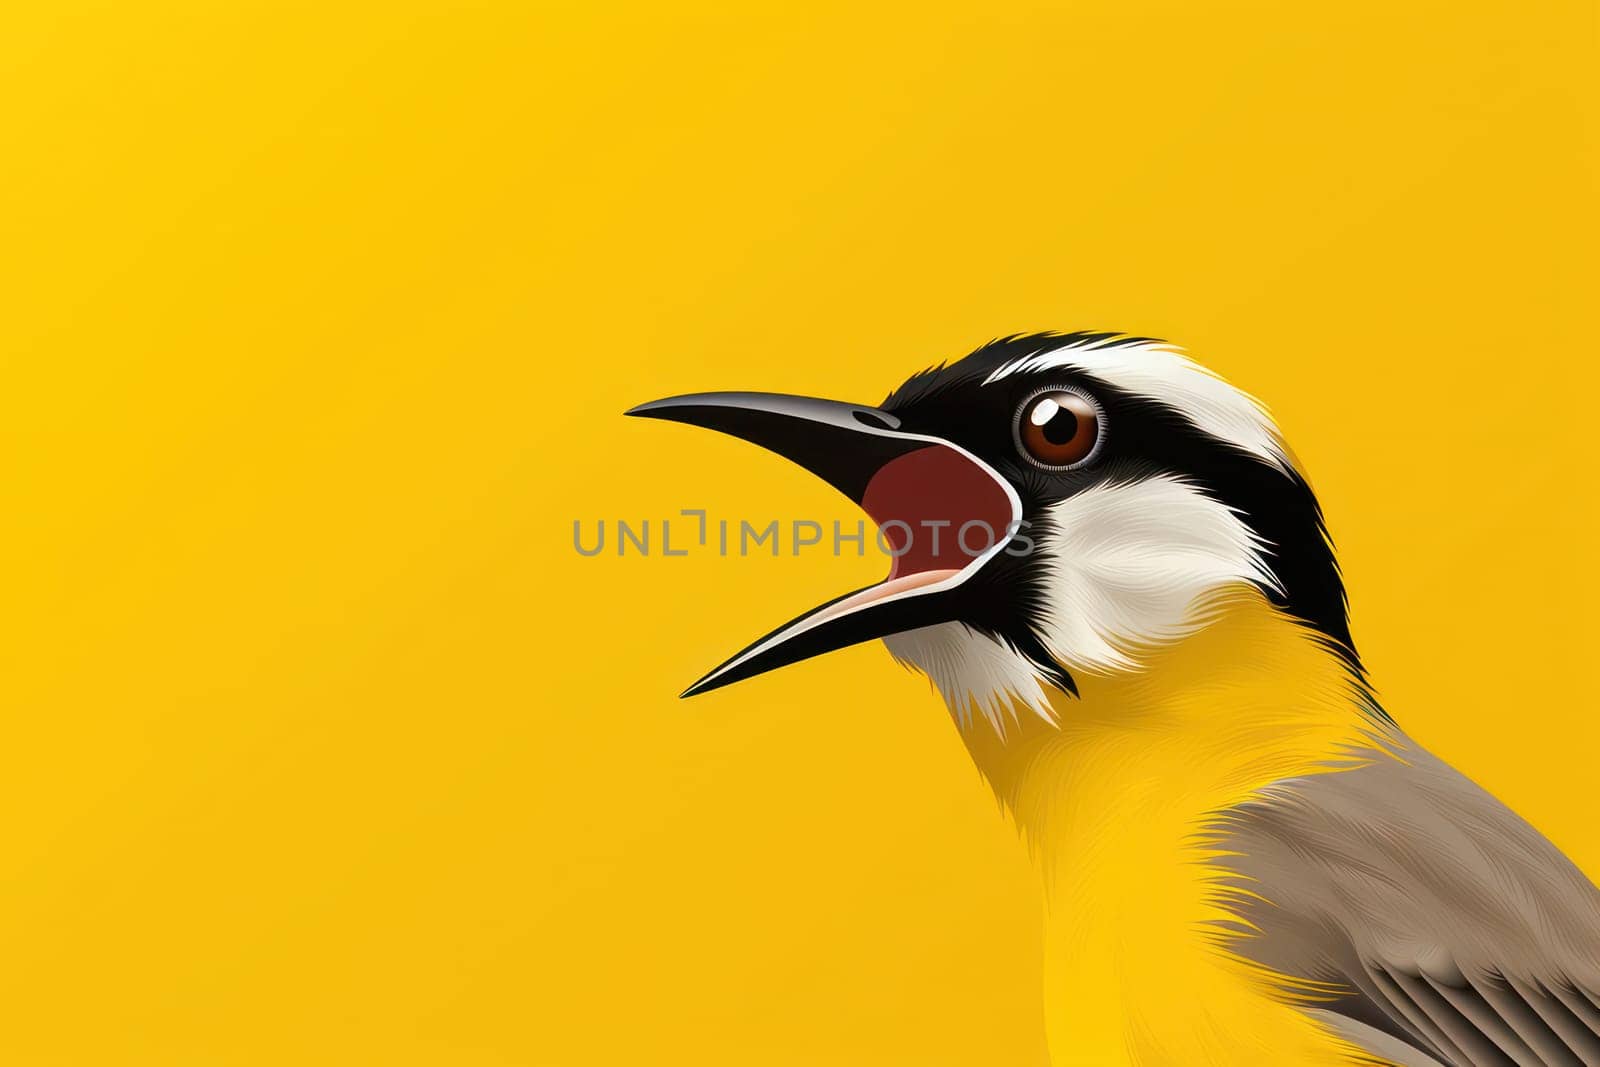 Colorful Wildlife Portrait: Black and White Penguin with Colorful Feathered Beak, Perched on a Branch, Isolated on Green Tropical Island Background by Vichizh